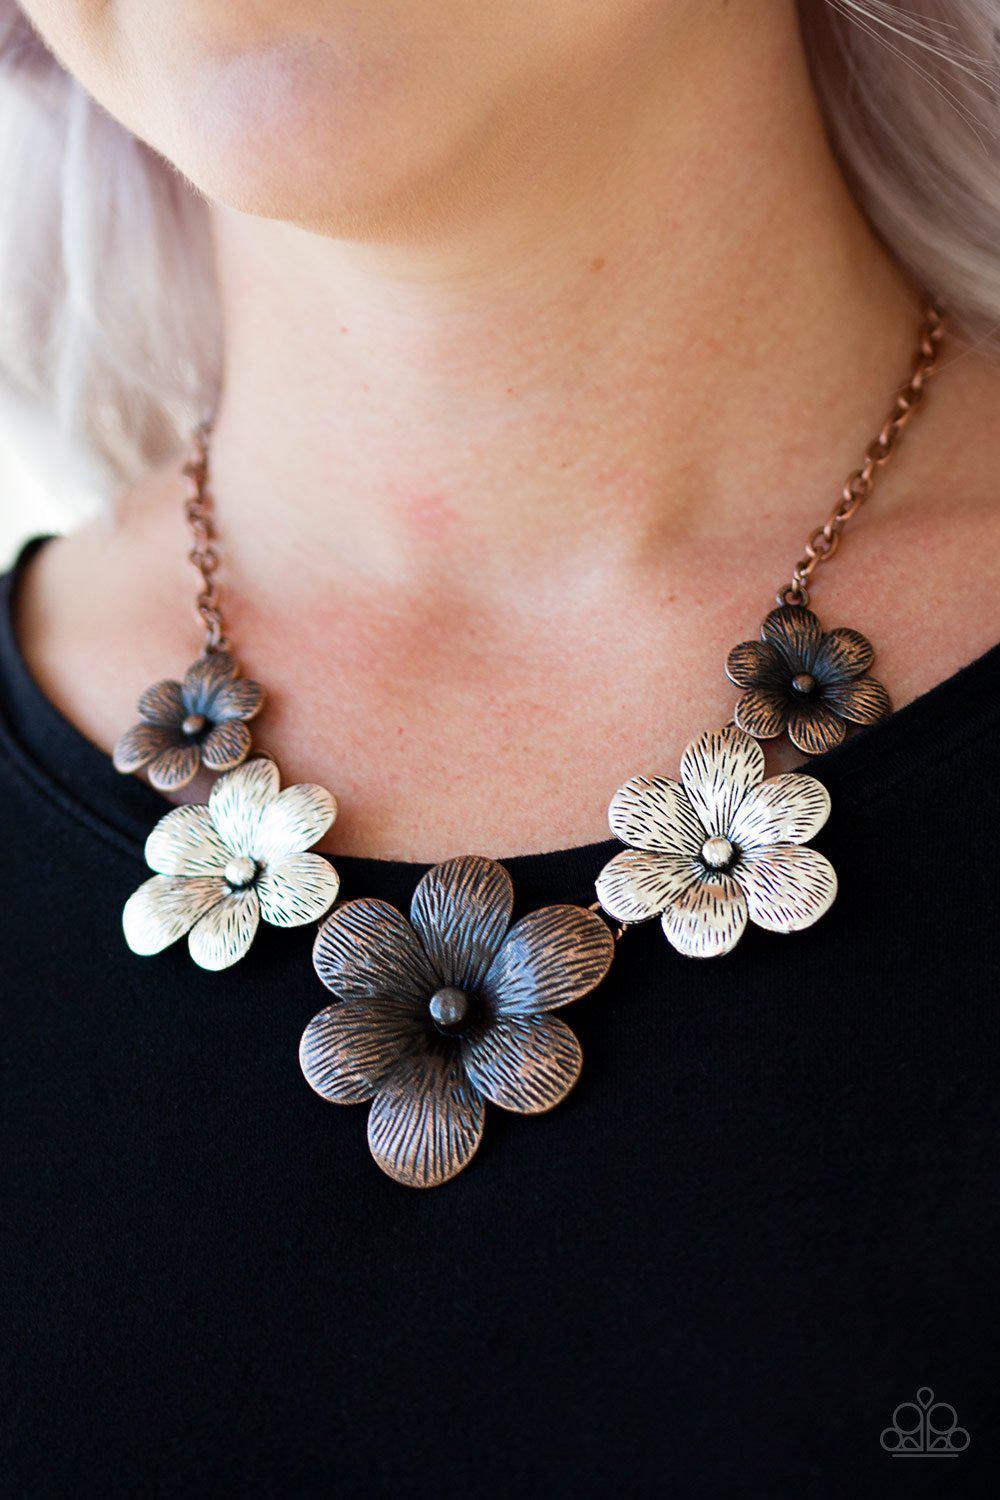 Secret Garden Multi Silver and Copper Flower Necklace and matching Earrings - Paparazzi Accessories-CarasShop.com - $5 Jewelry by Cara Jewels